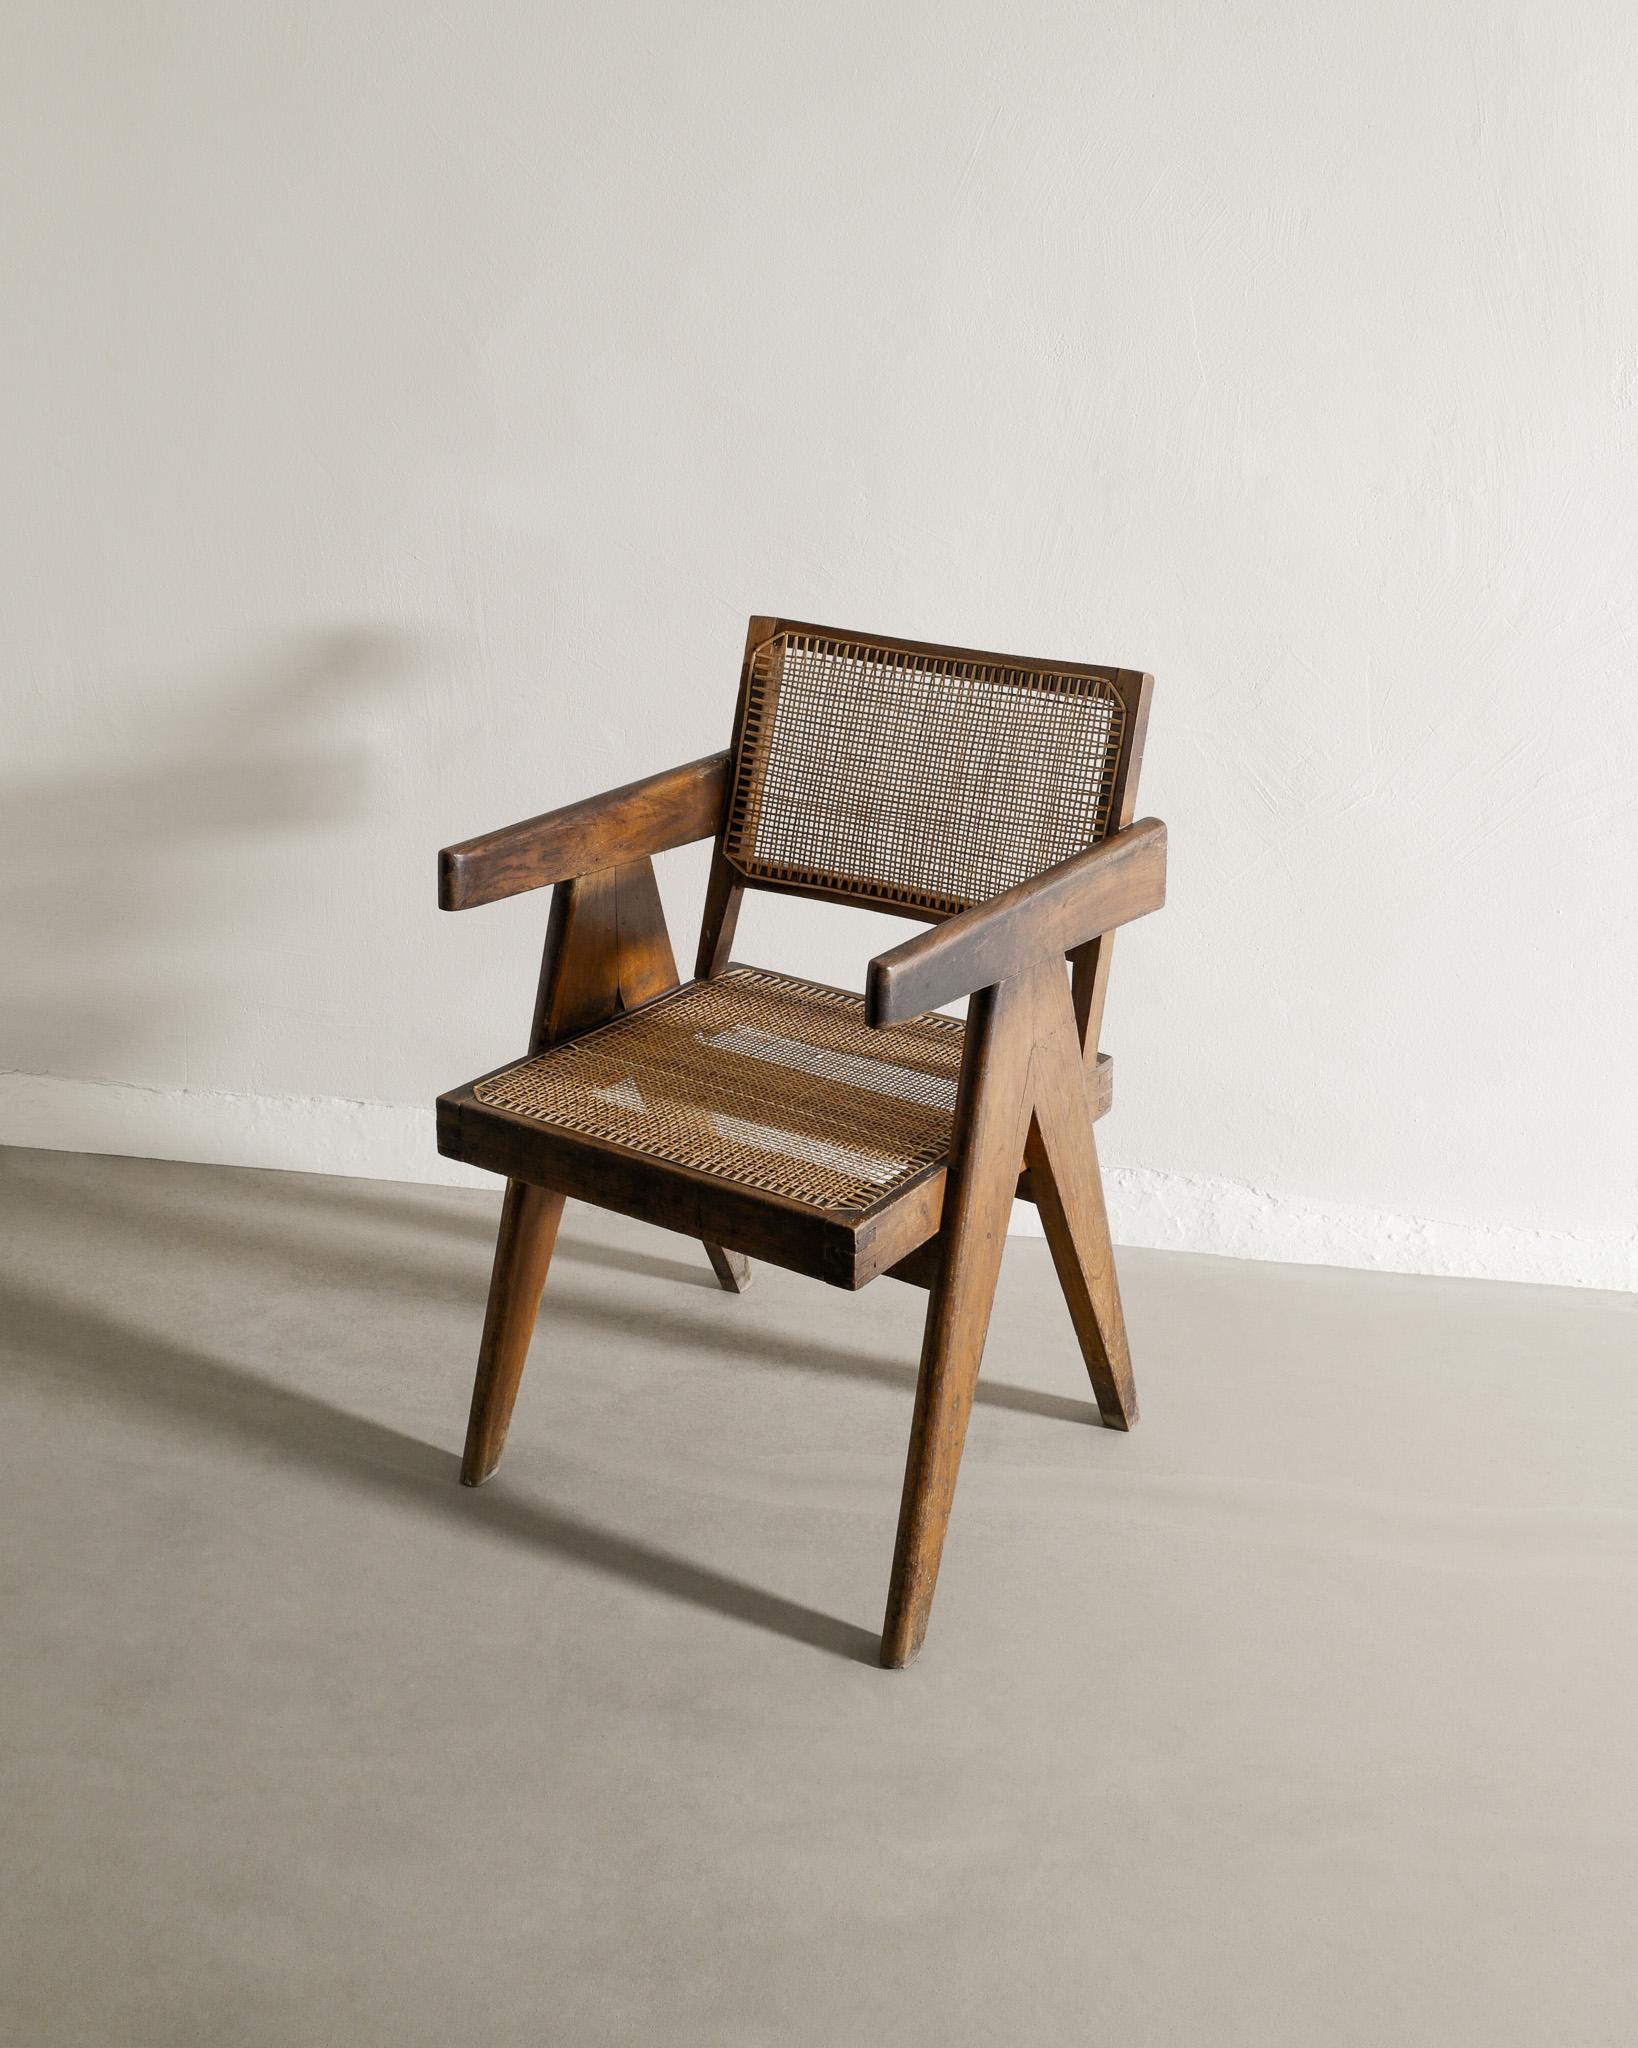 Indian Pierre Jeanneret Mid Century Wooden Office Chair in Teak & Rattan Produced 1950s For Sale